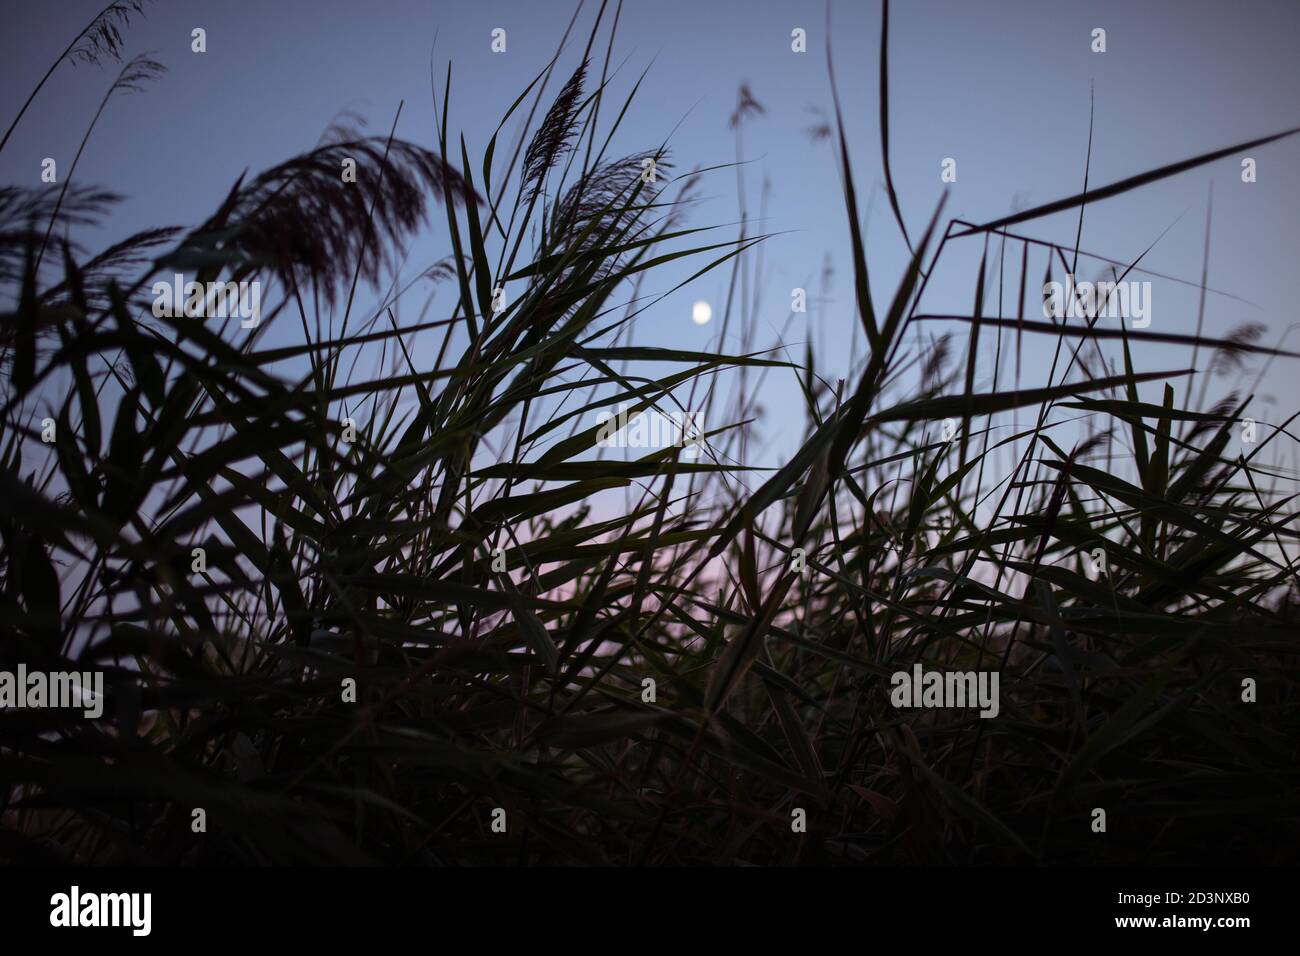 The bunch of phragmites or common reed is in front, and pink and blue dusk skies with the waning moon in the background Stock Photo